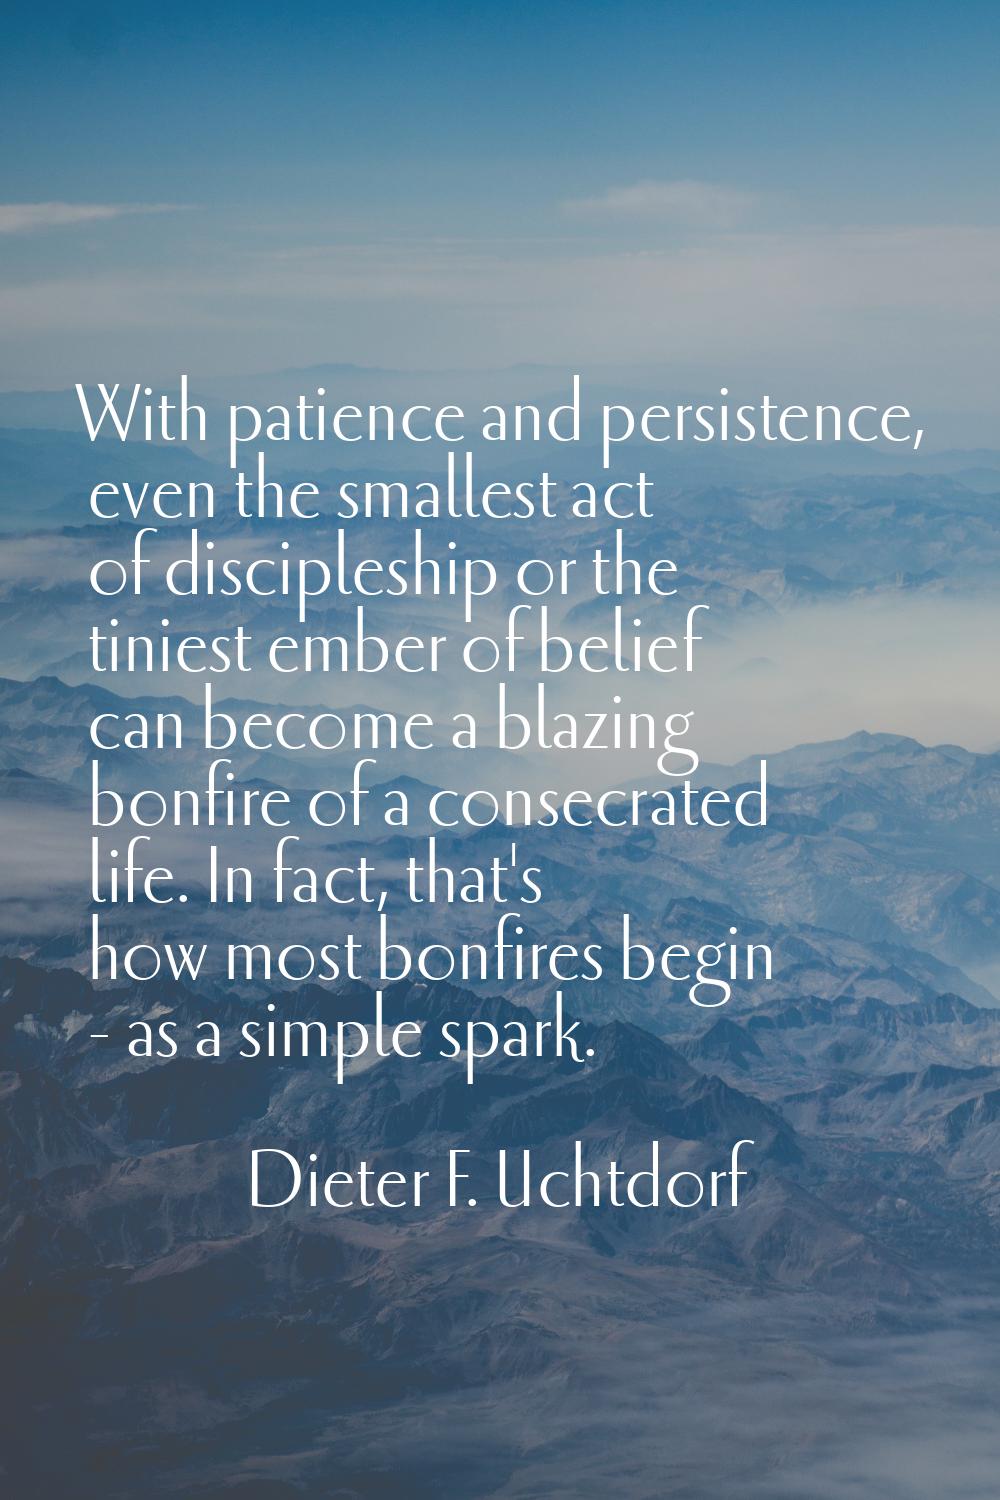 With patience and persistence, even the smallest act of discipleship or the tiniest ember of belief